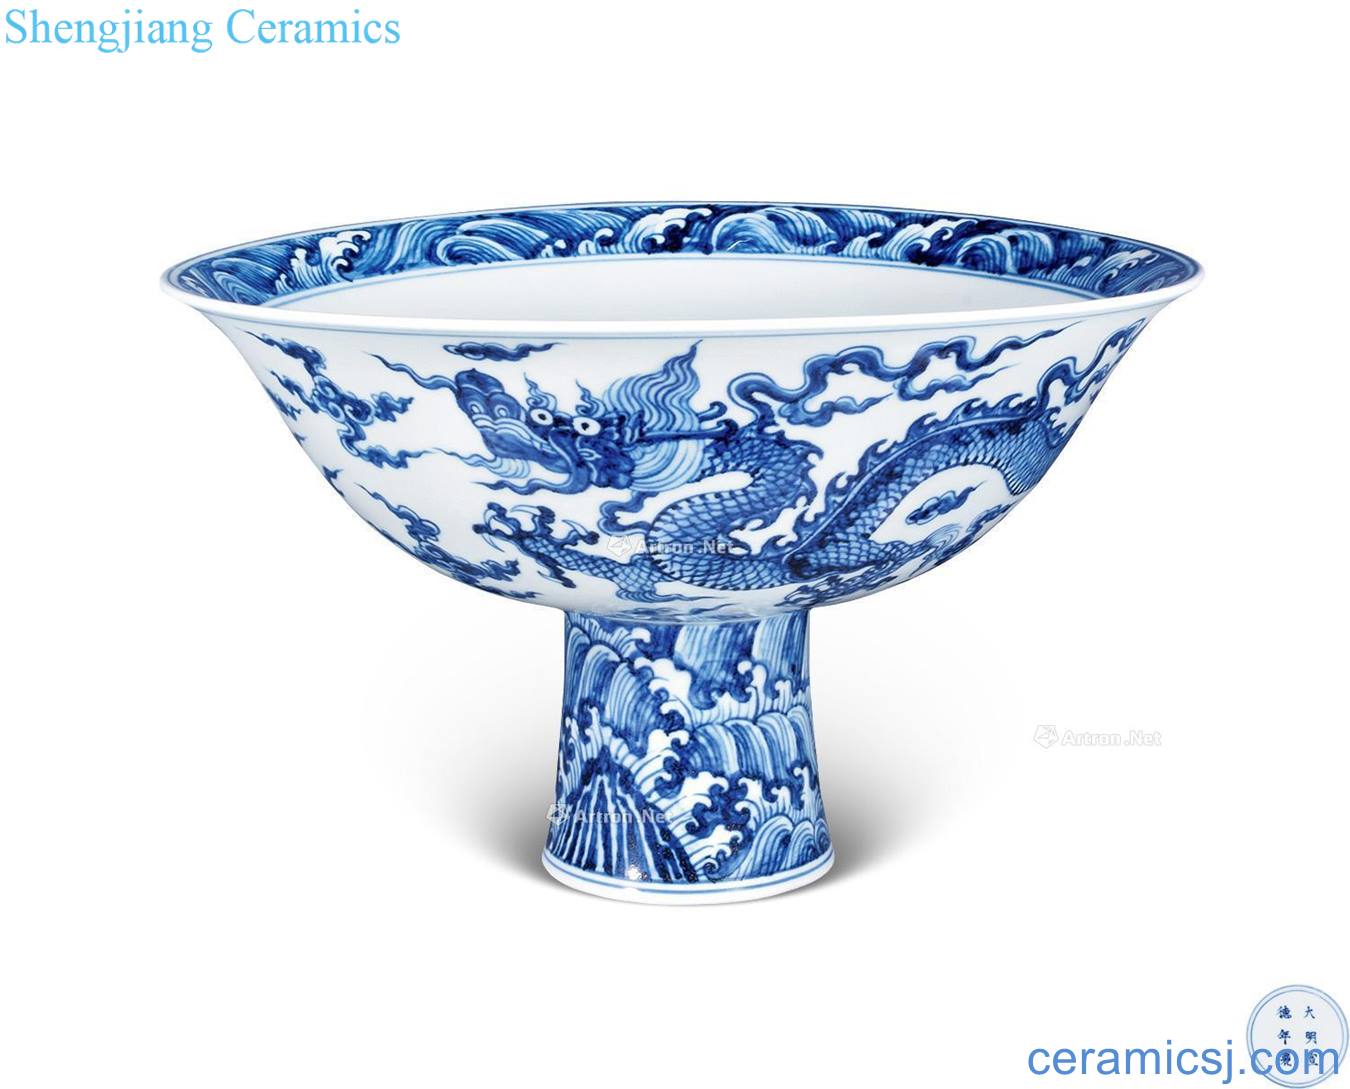 Daming jintong Blue and white longfeng grain footed bowl